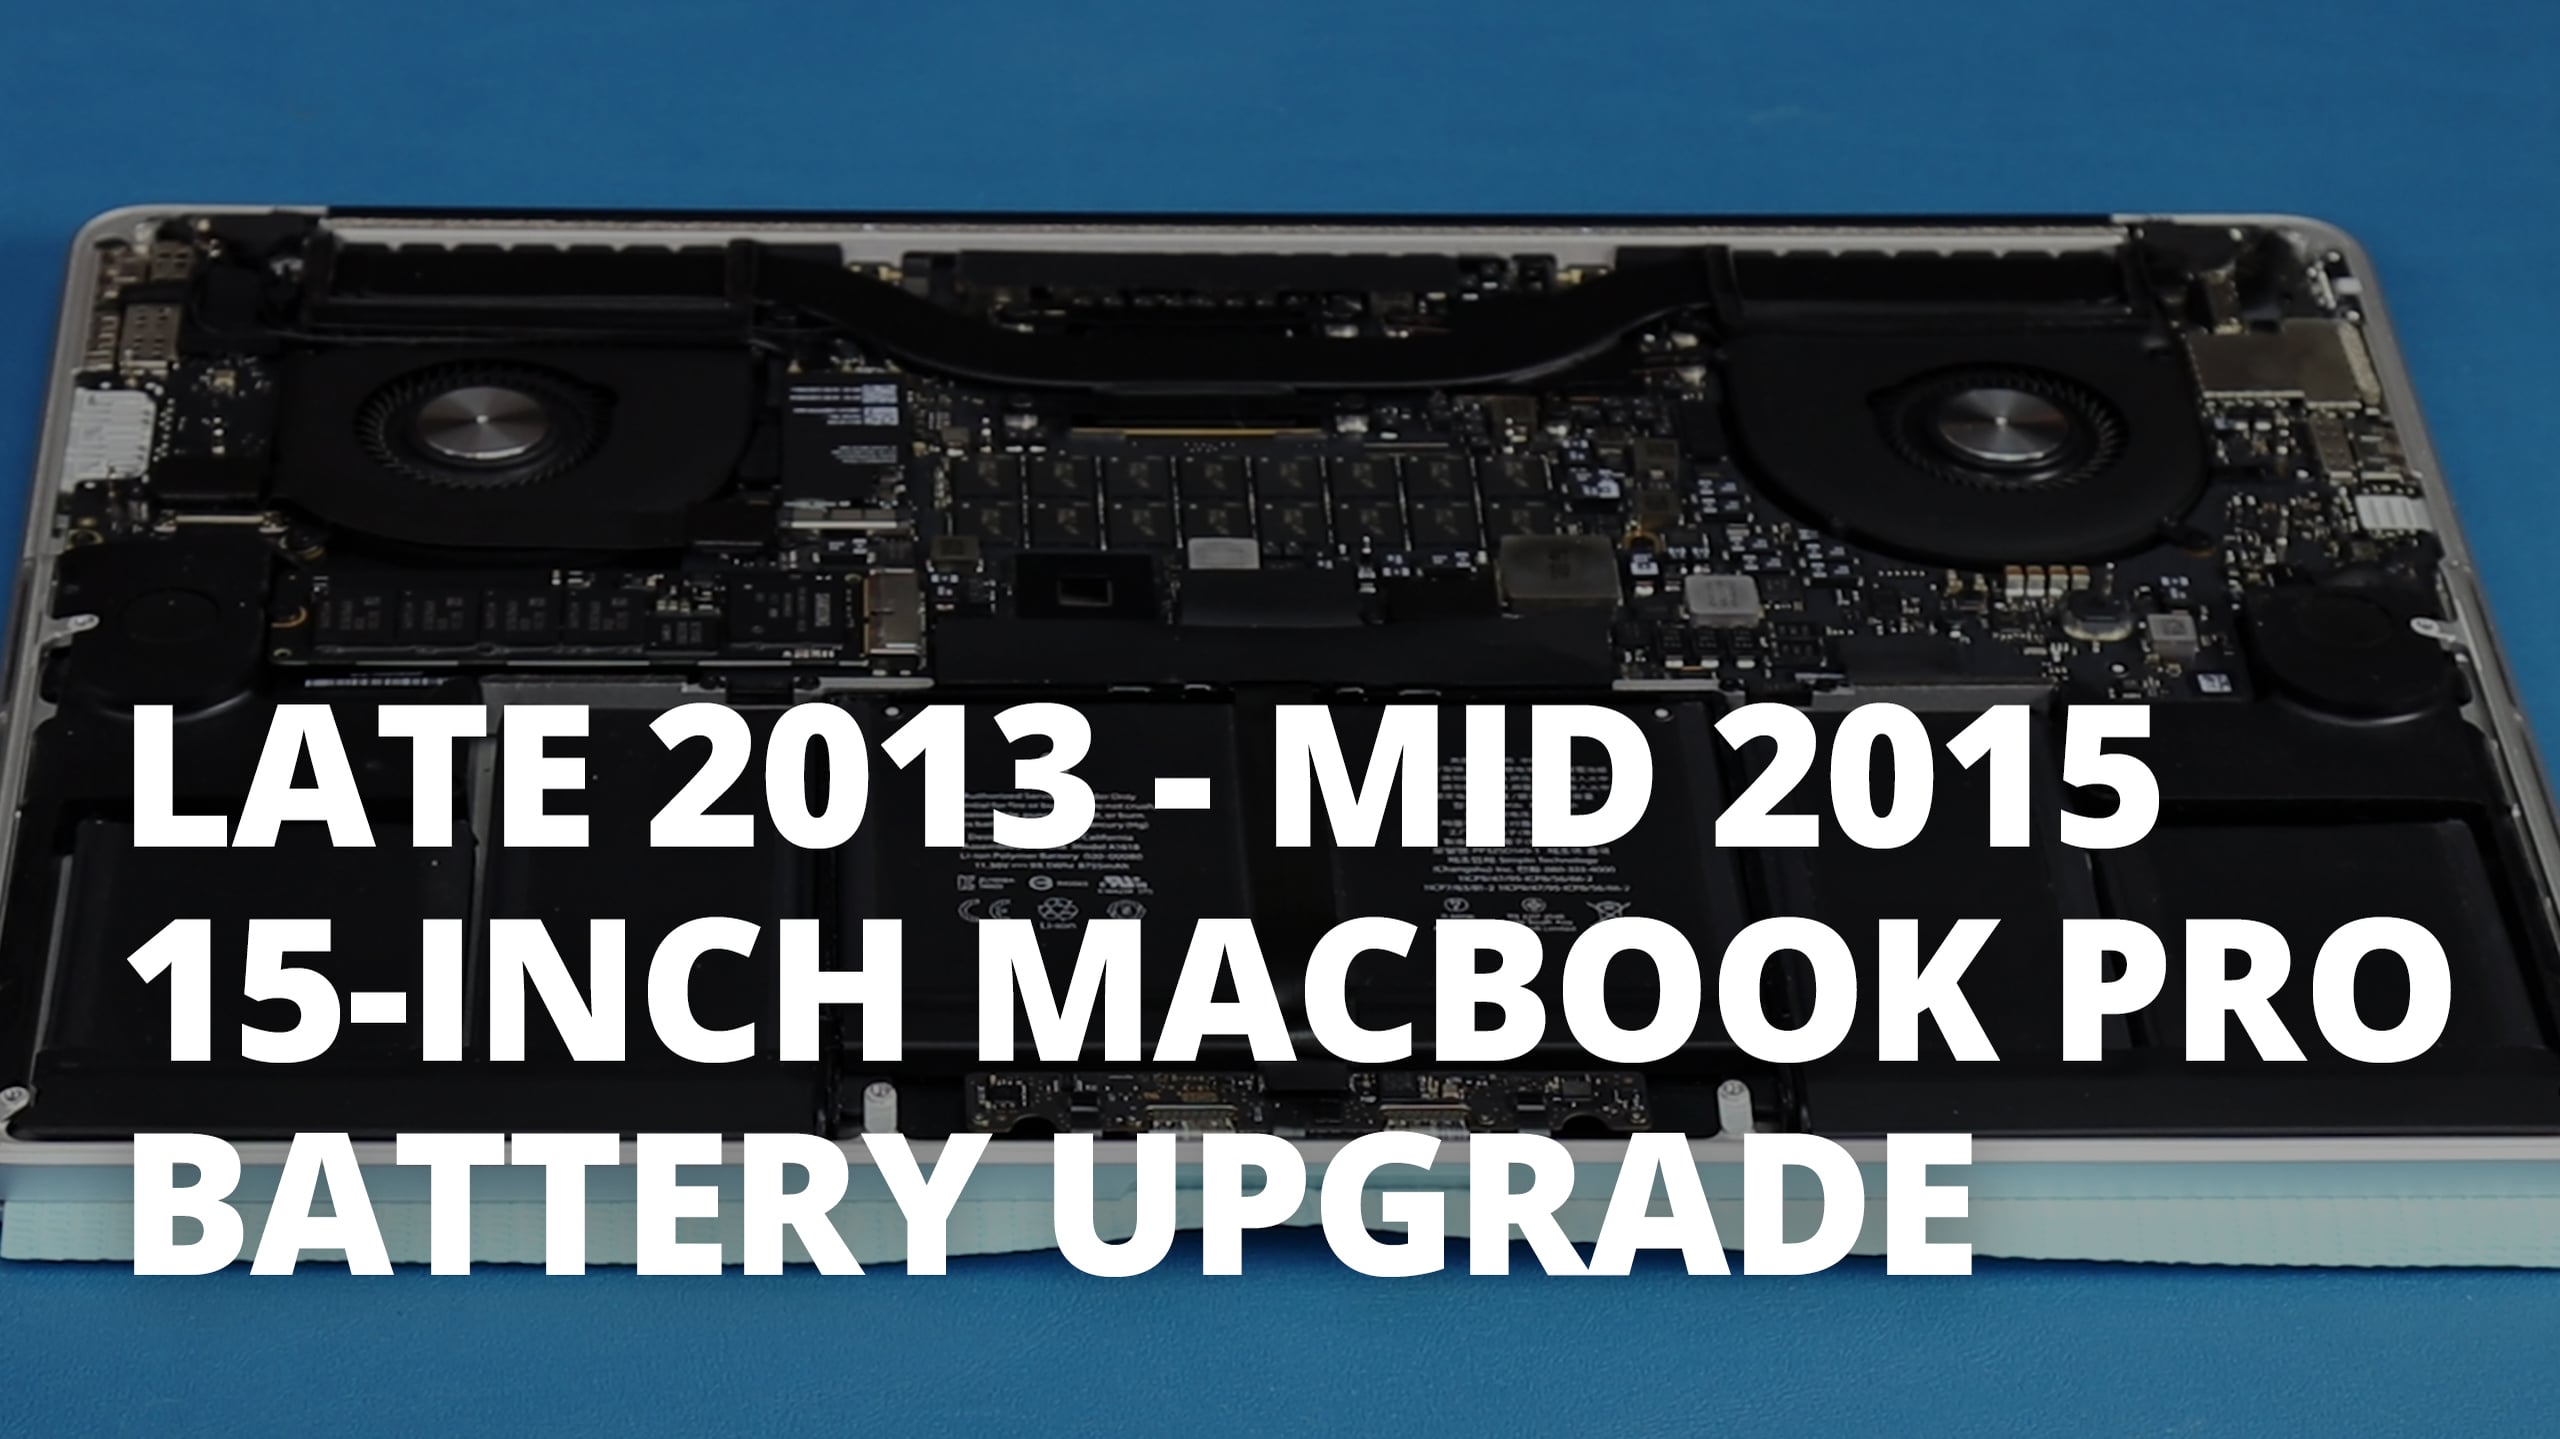 How to Upgrade Replace the Battery in MacBook Pro Retina 15-inch (late 2013 to mid 2015) on Vimeo